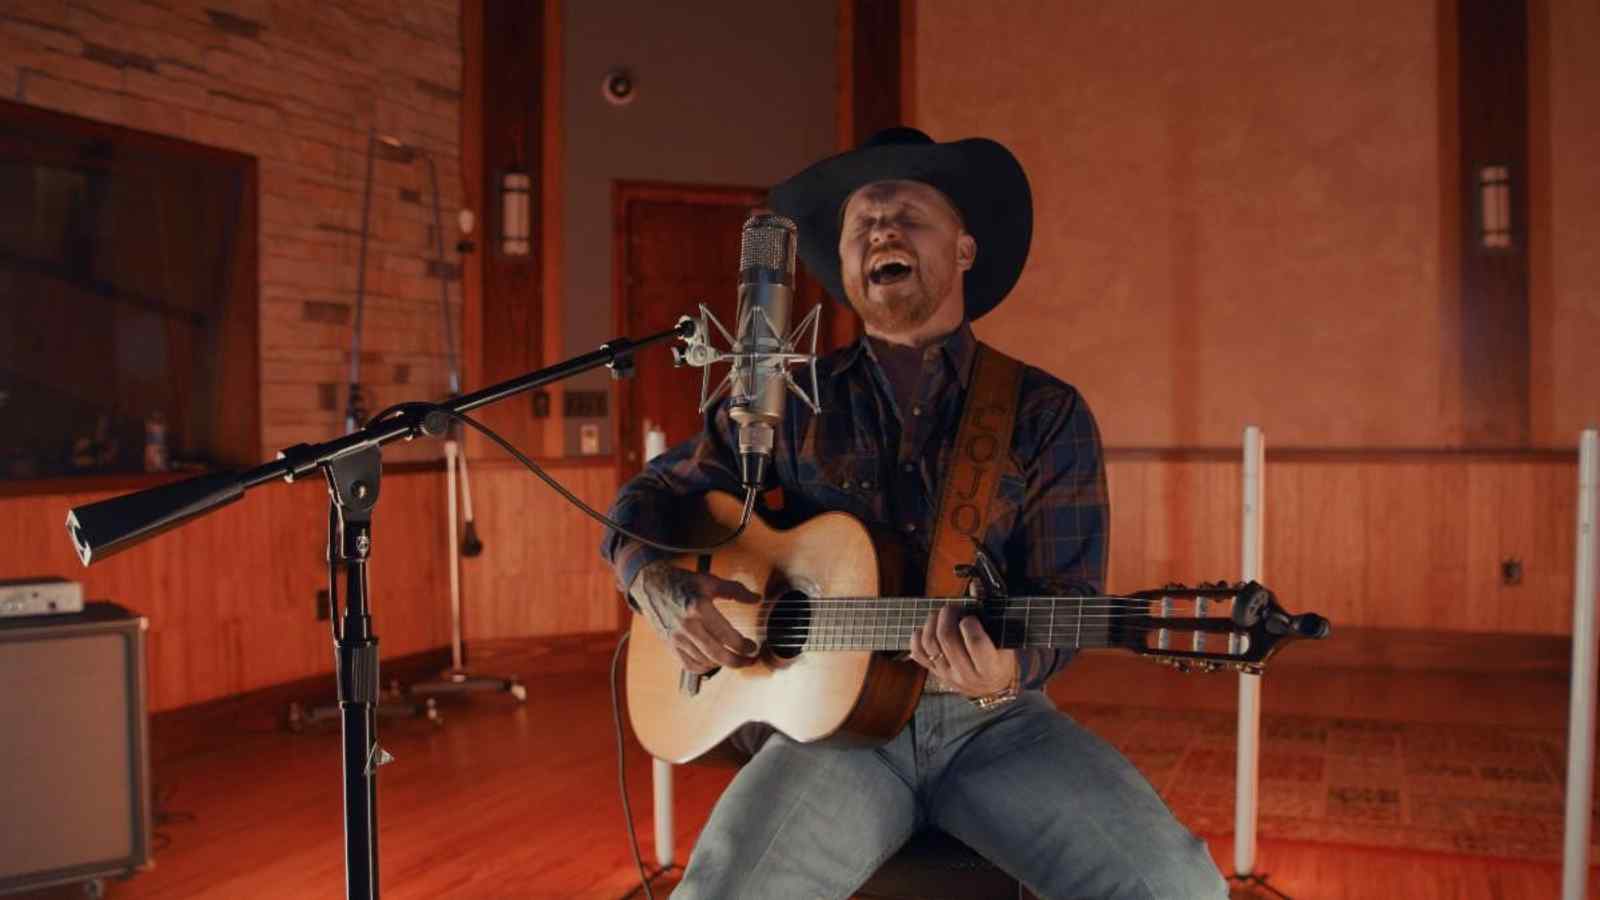 CODY JOHNSON RELEASES BREATHTAKING VERSION OF REBA MCENTIRE’S “WHOEVER’S IN NEW ENGLAND”